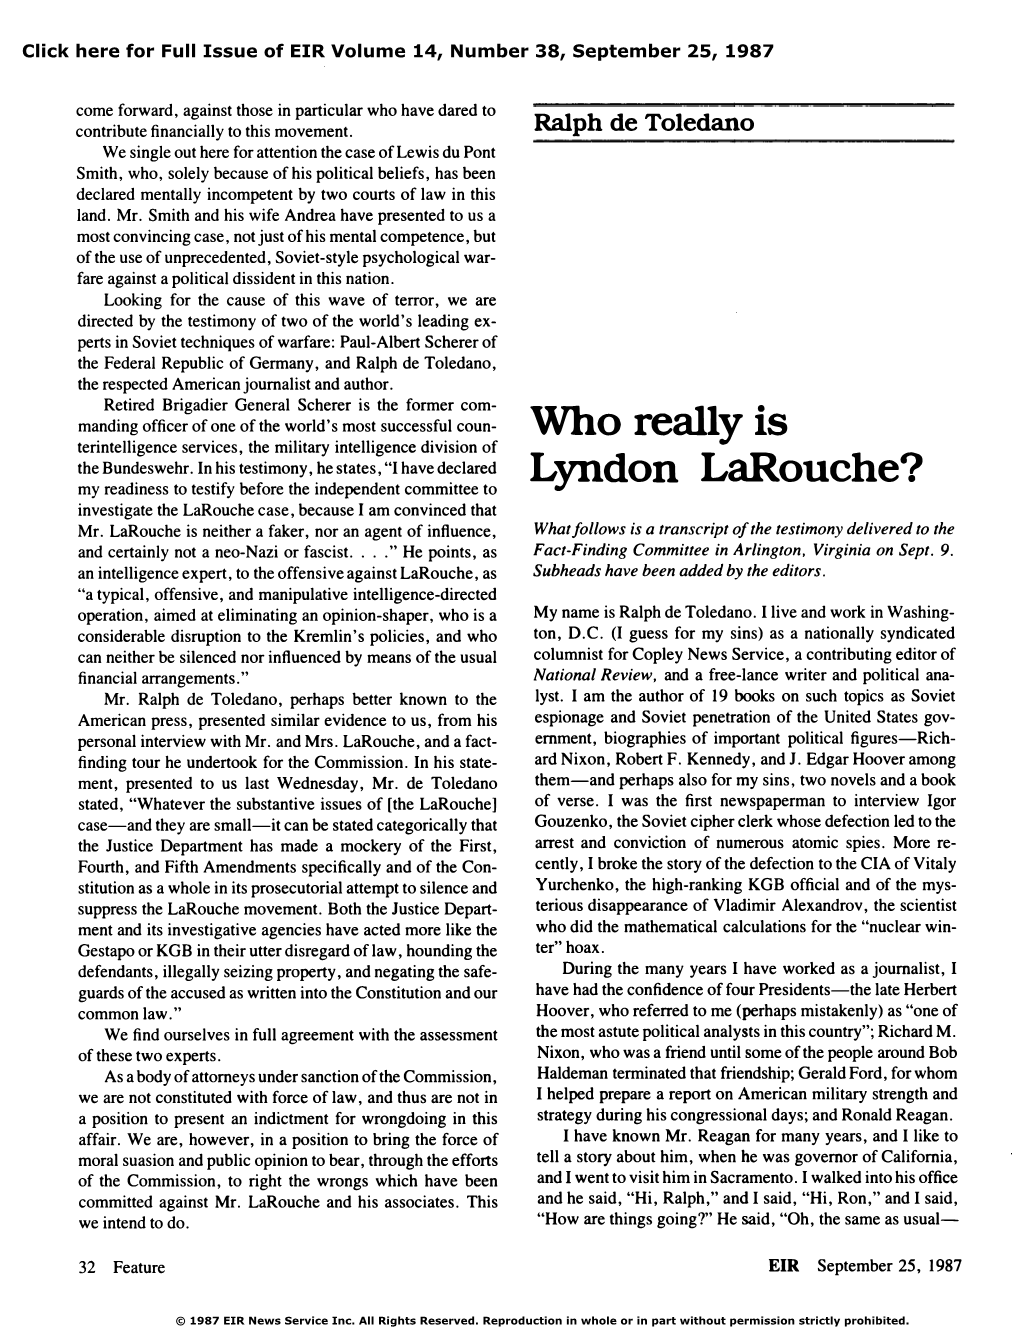 Who Really Is Lyndon Larouche?